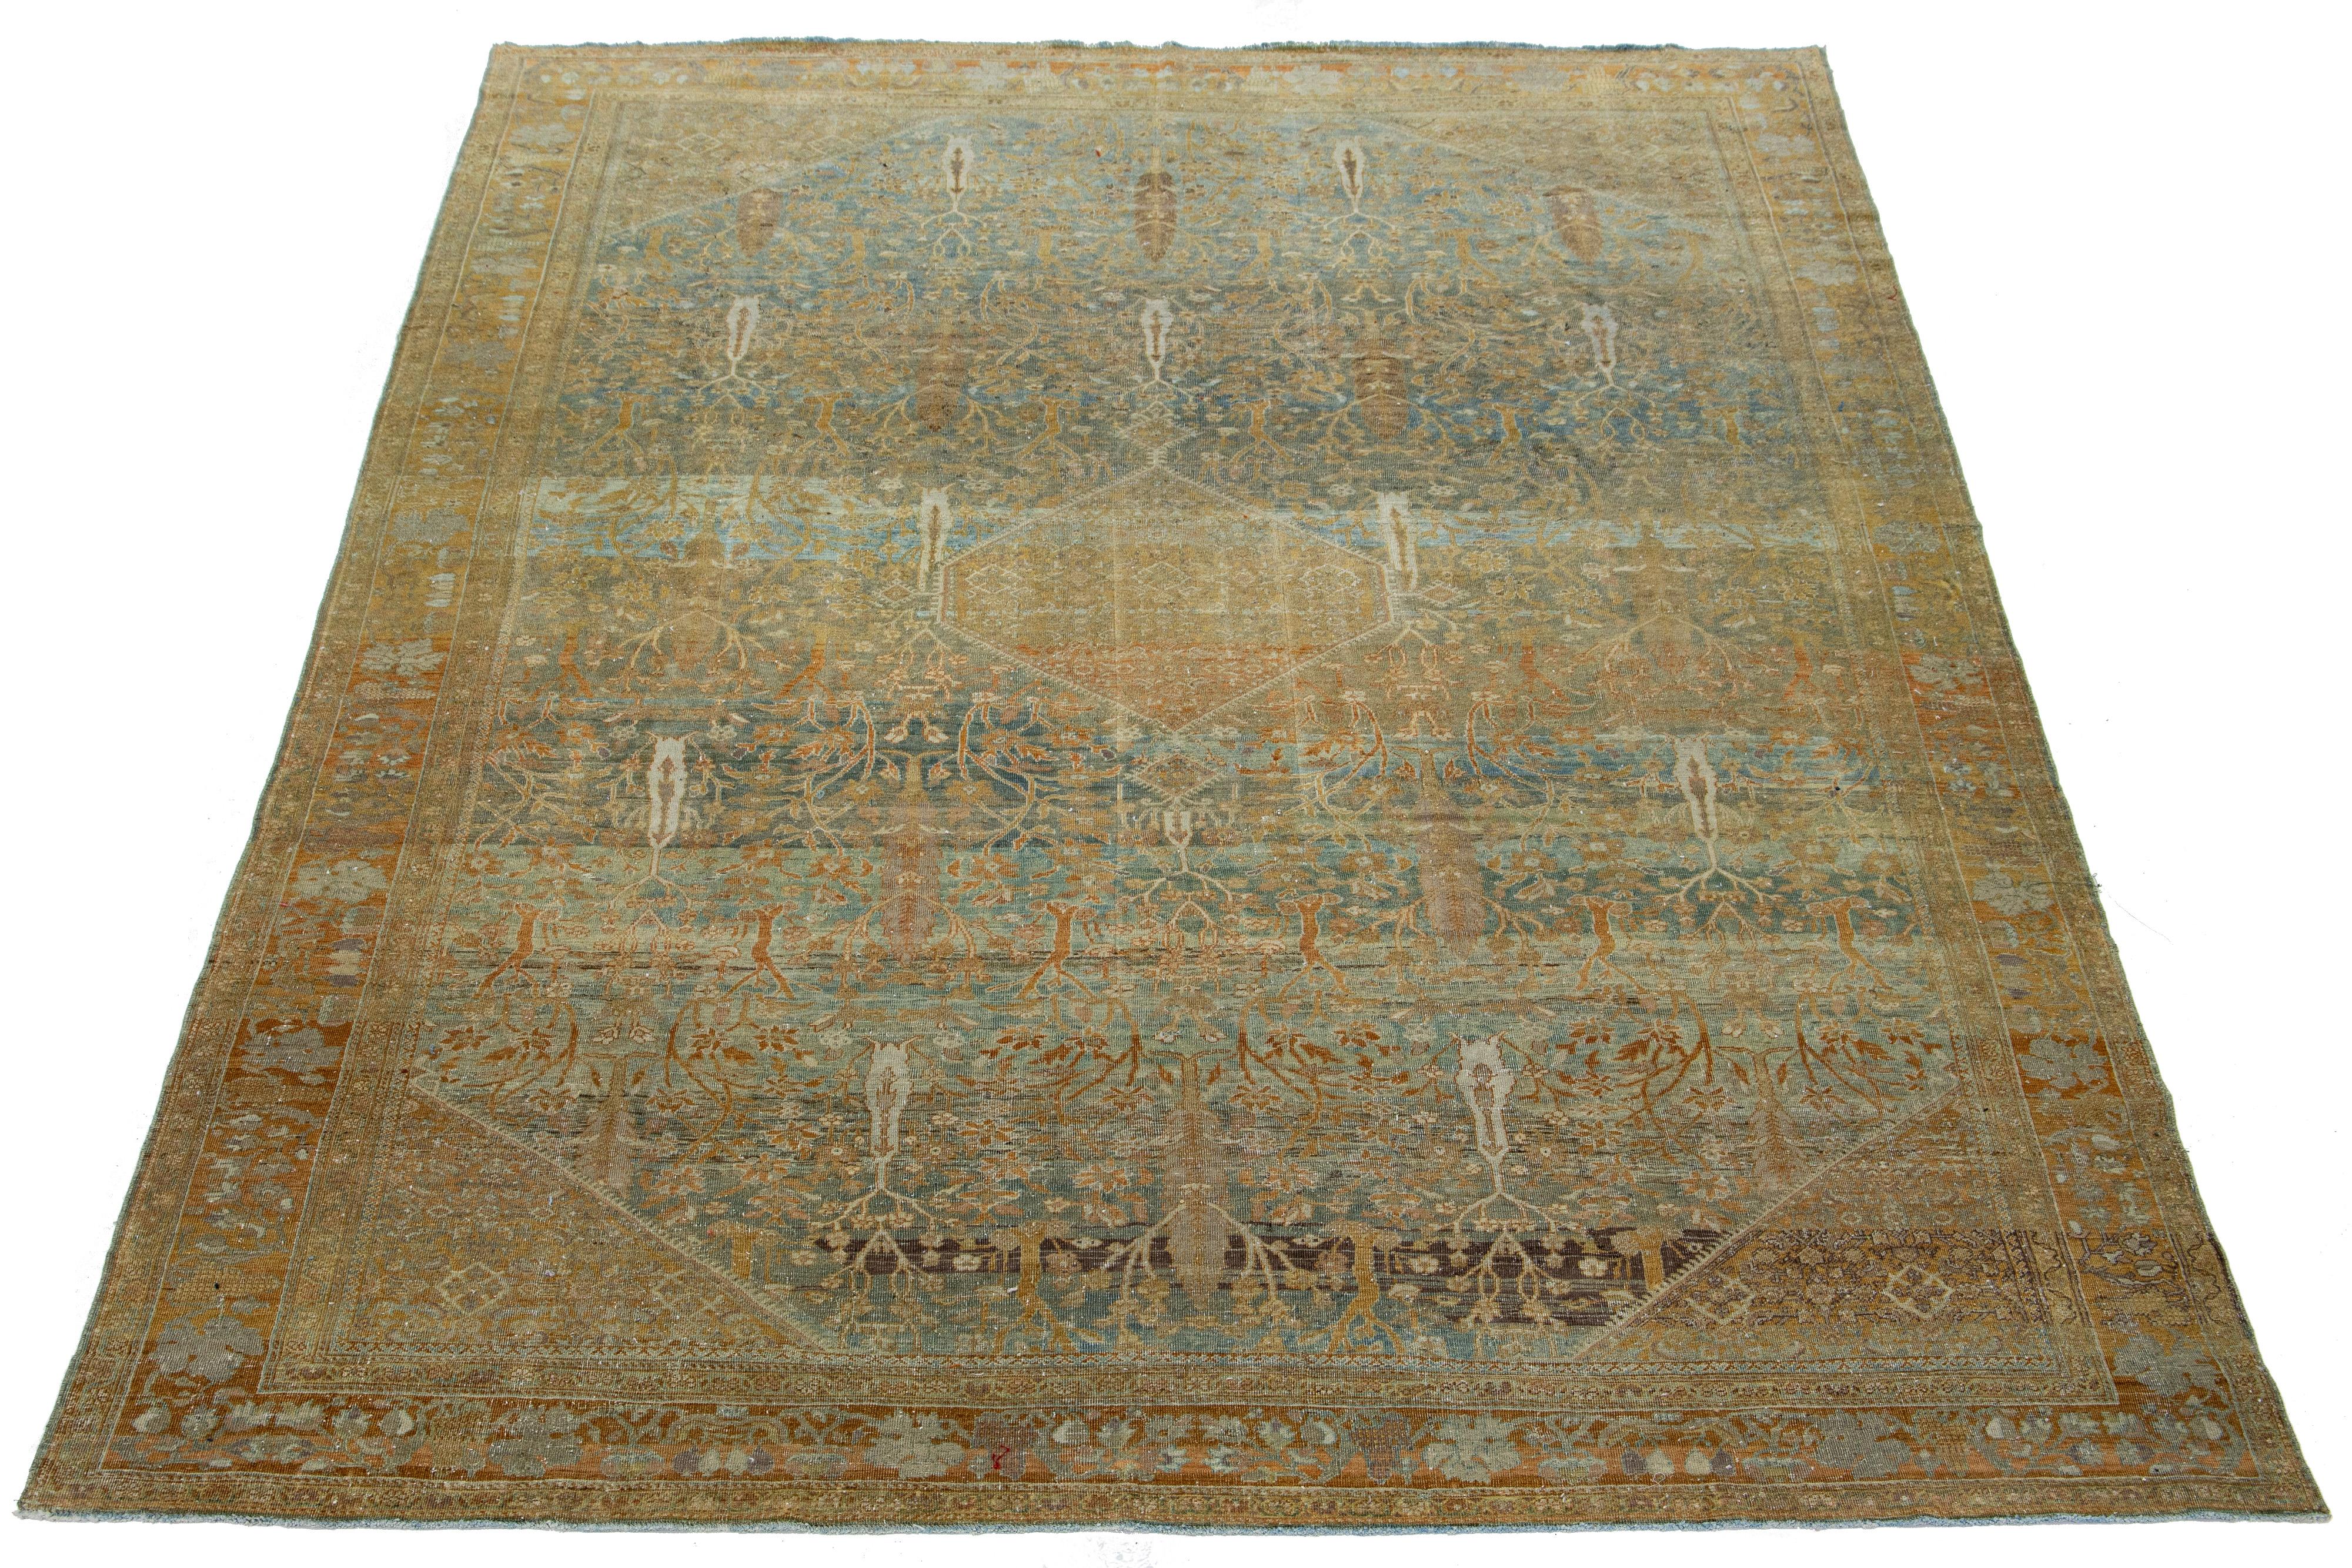 Beautiful Antique Sarouk hand-knotted wool rug with a blue color field. This Persian rug has a Classic beige, rust, and brown floral motif.

This rug measures 7'11